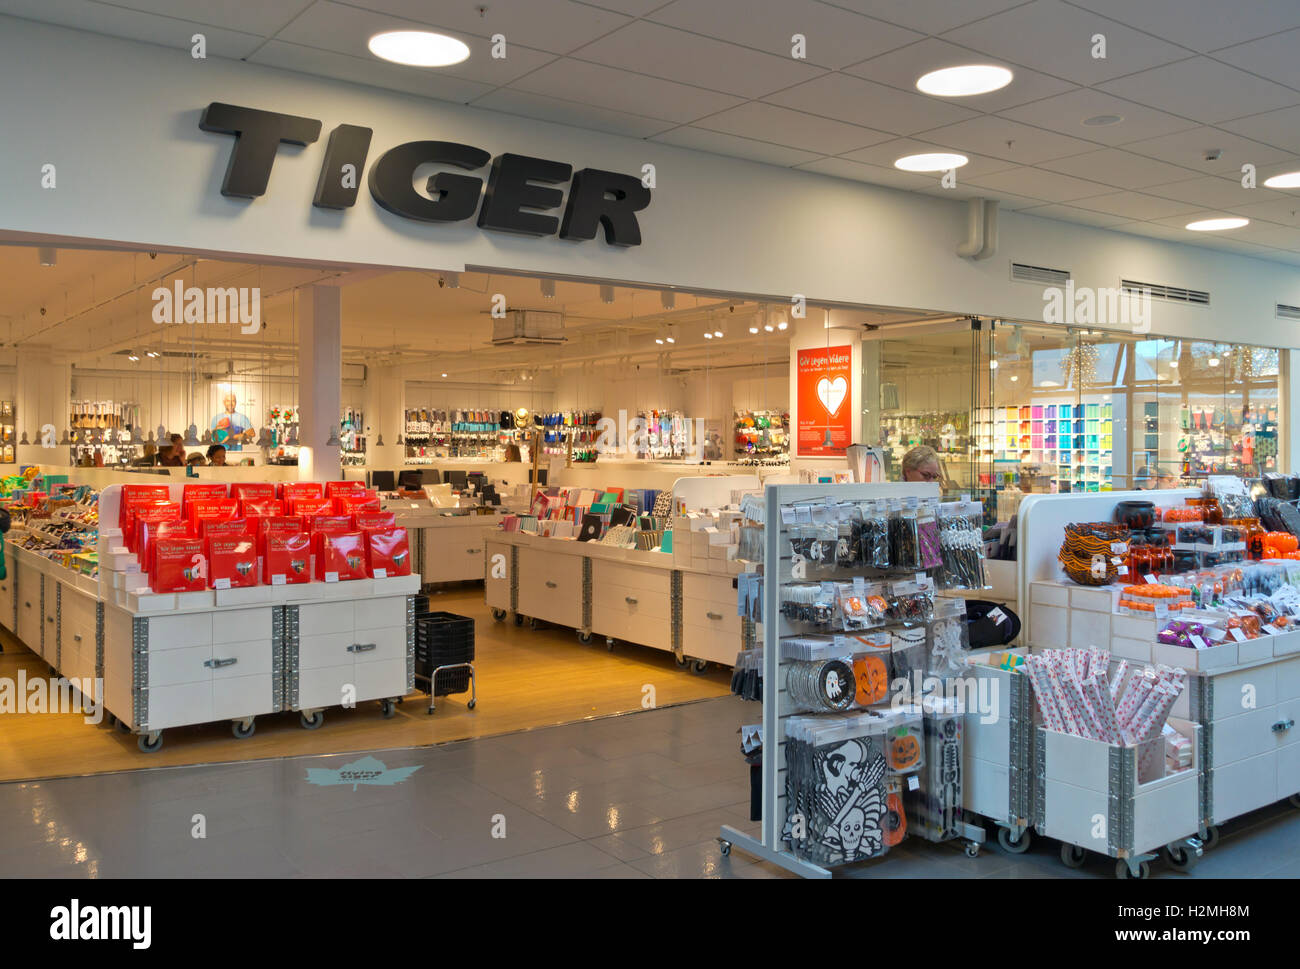 tiger shop products online